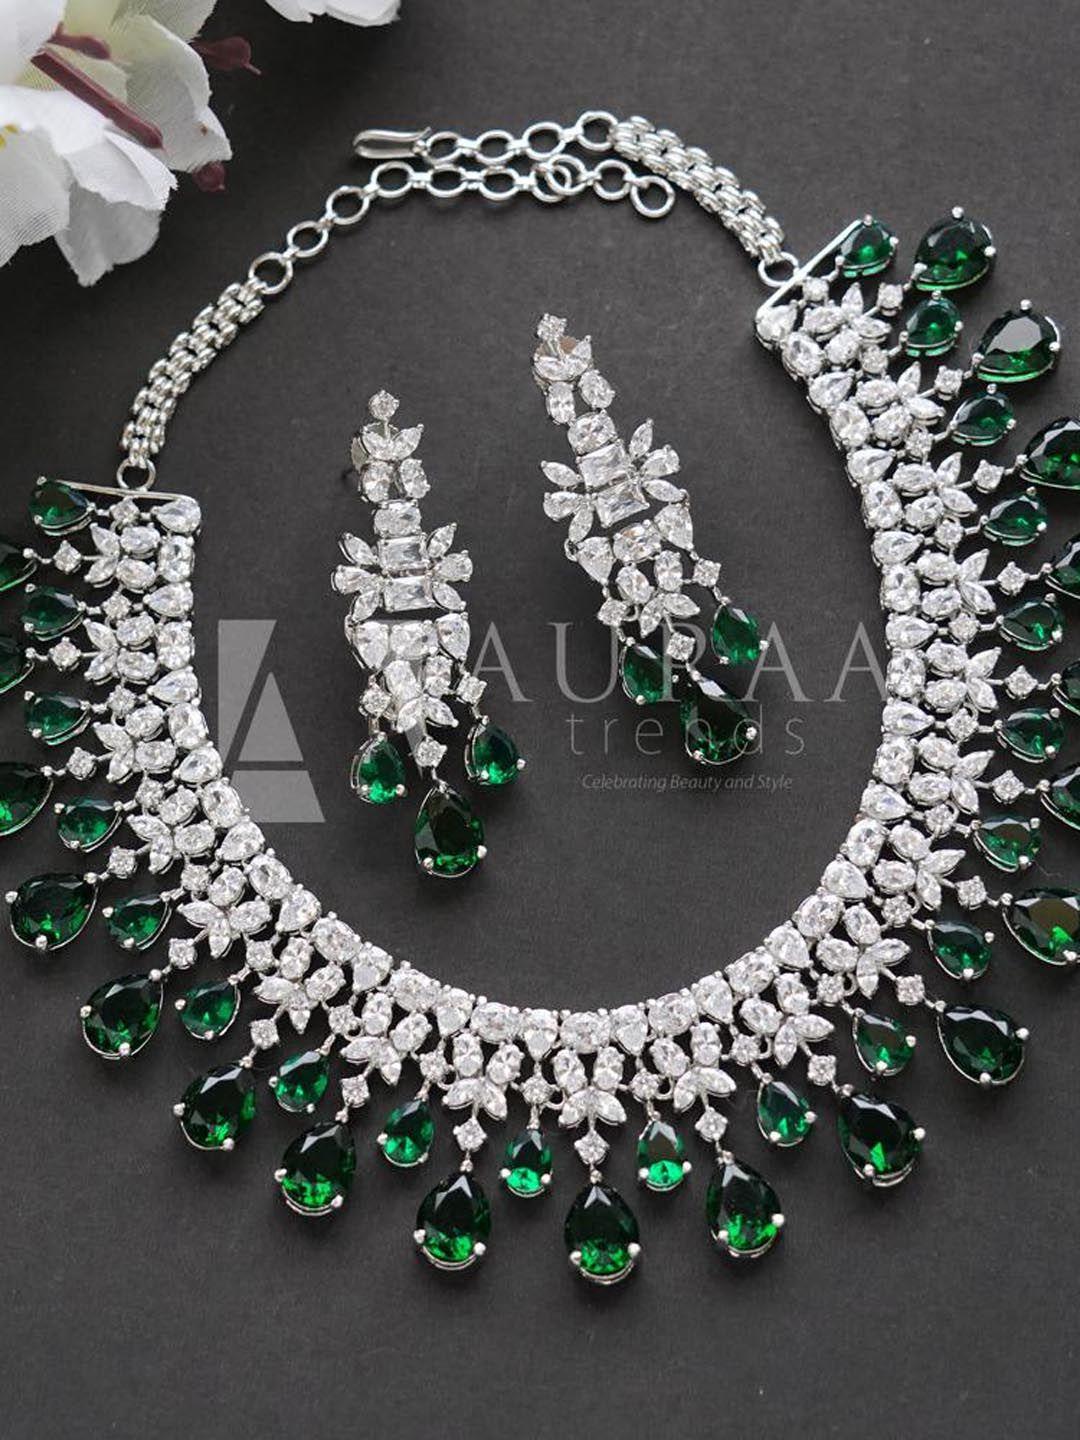 auraa trends rhodium-plated silver-toned green ad studded jewellery set